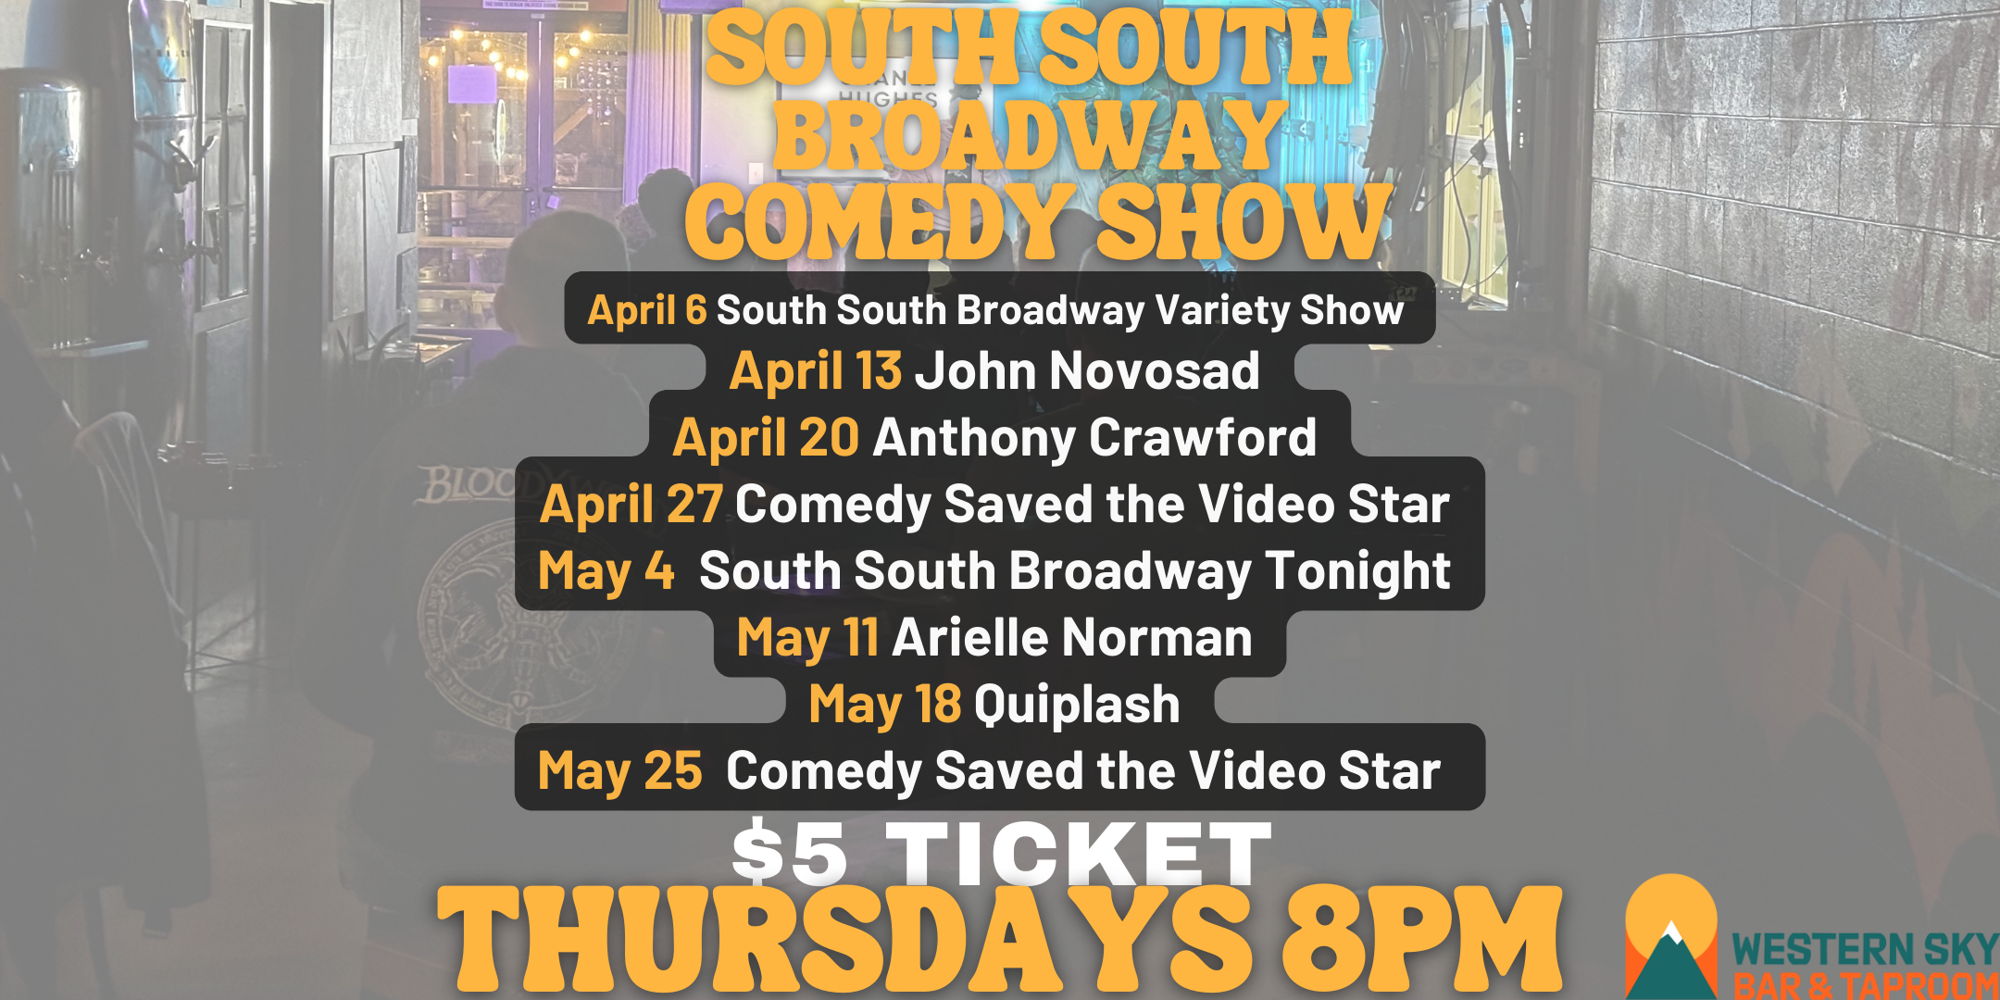 South South Broadway Comedy Show promotional image